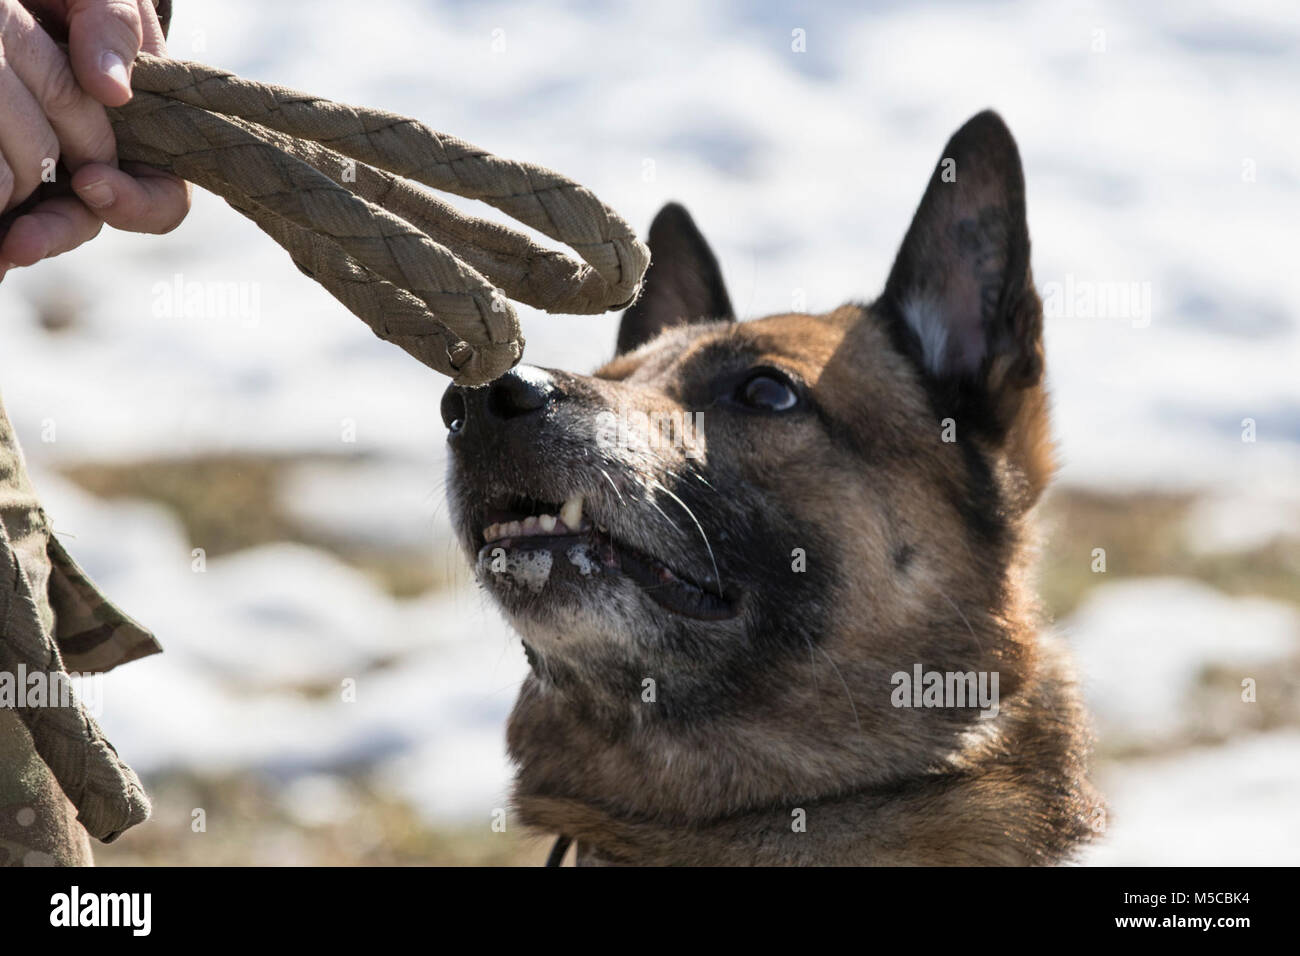 Spc. Chengo, a military working dog of KFOR Multinational Battle Group-East, Task Force Military Police, eyes a chew toy held by his handler during a MWD demonstration, Jan. 31, 2018, on Camp Bondsteel, Kosovo. (U.S. Army Stock Photo